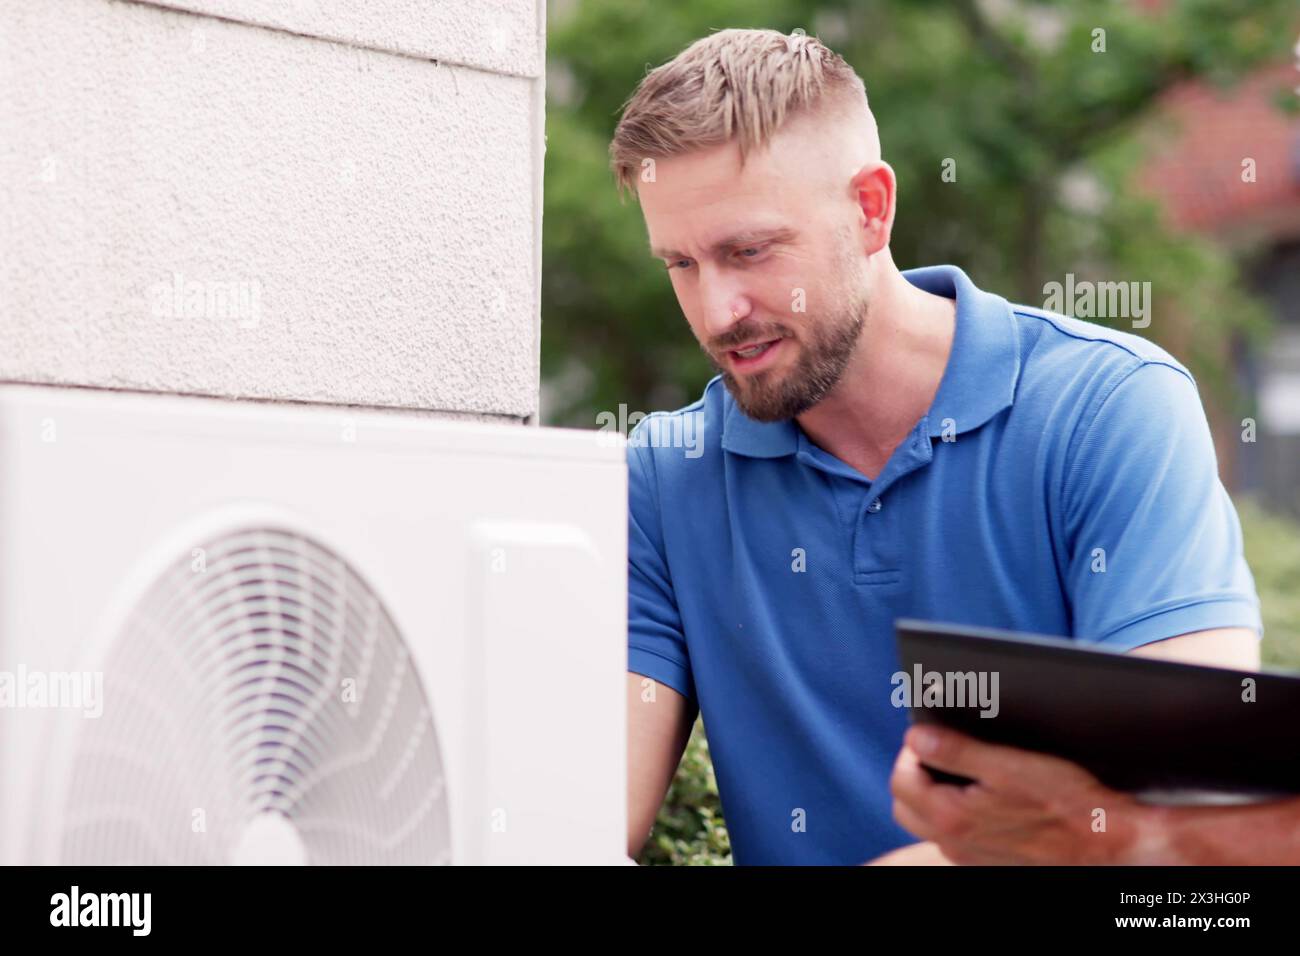 Electric Air Conditioner Install: Service Safety Condition Requirement Stock Photo